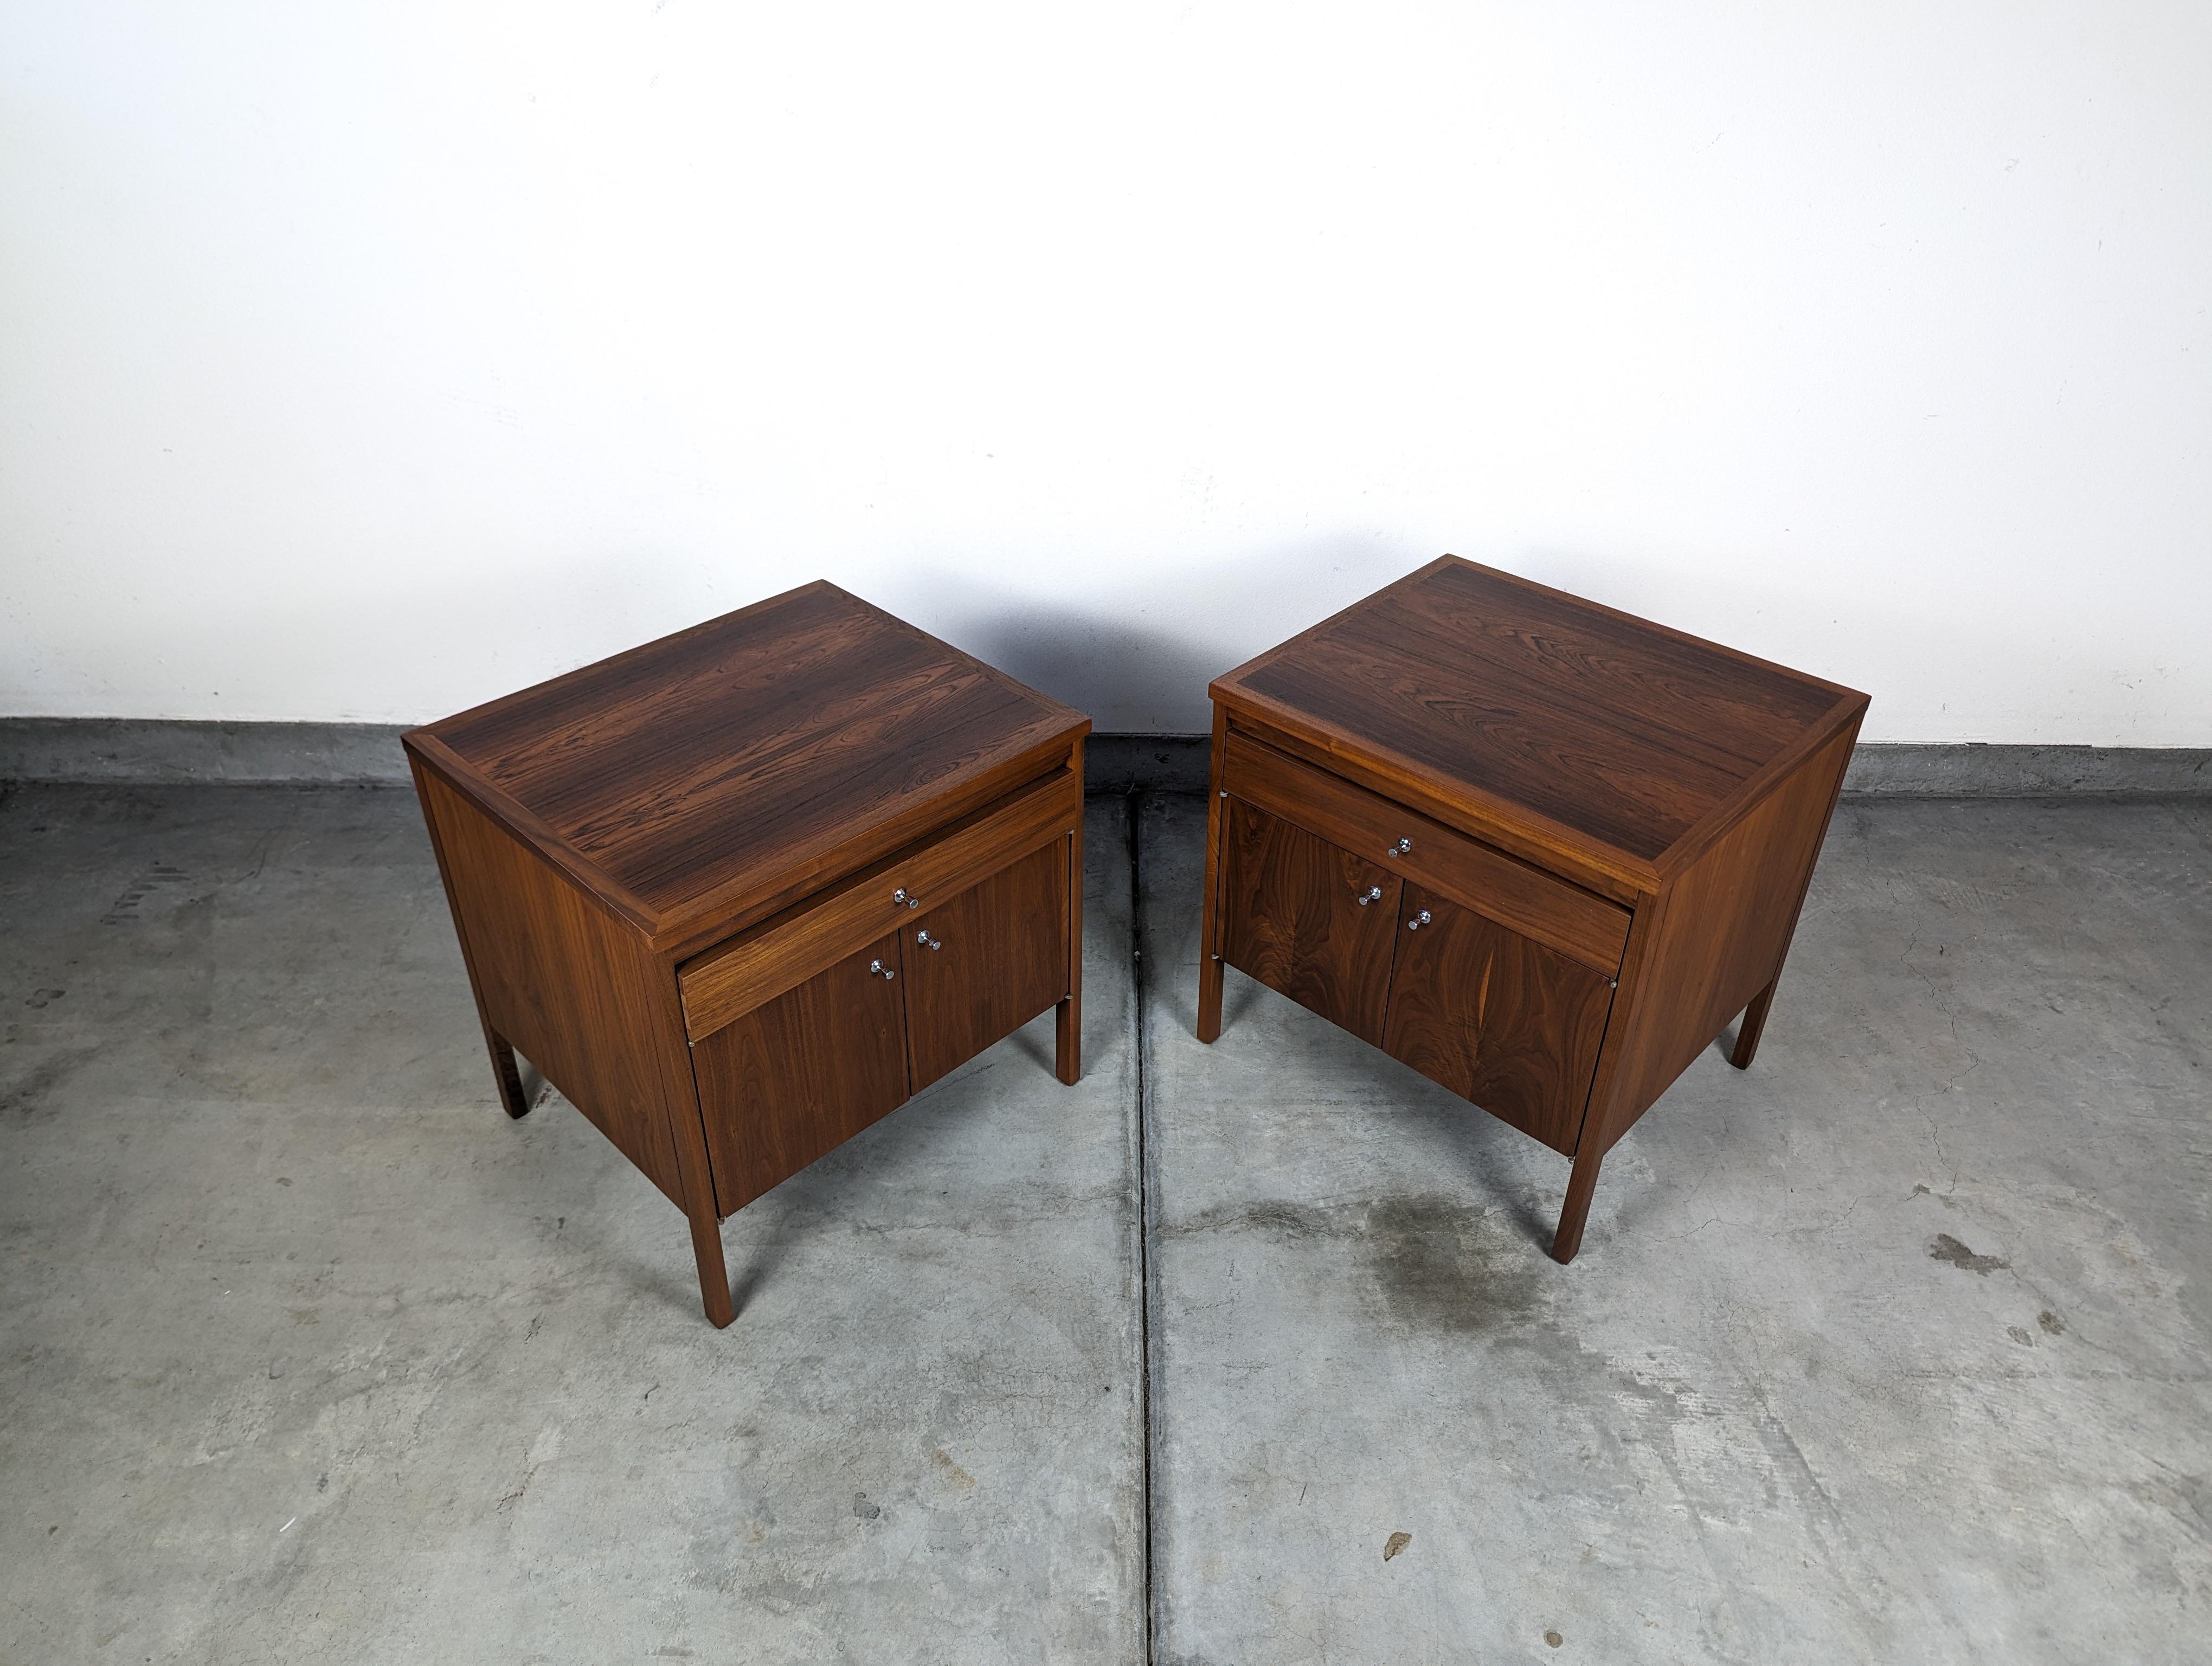 Pair of Mid Century Modern Delineator Nightstands by Paul McCobb for Lane, c1960 For Sale 3